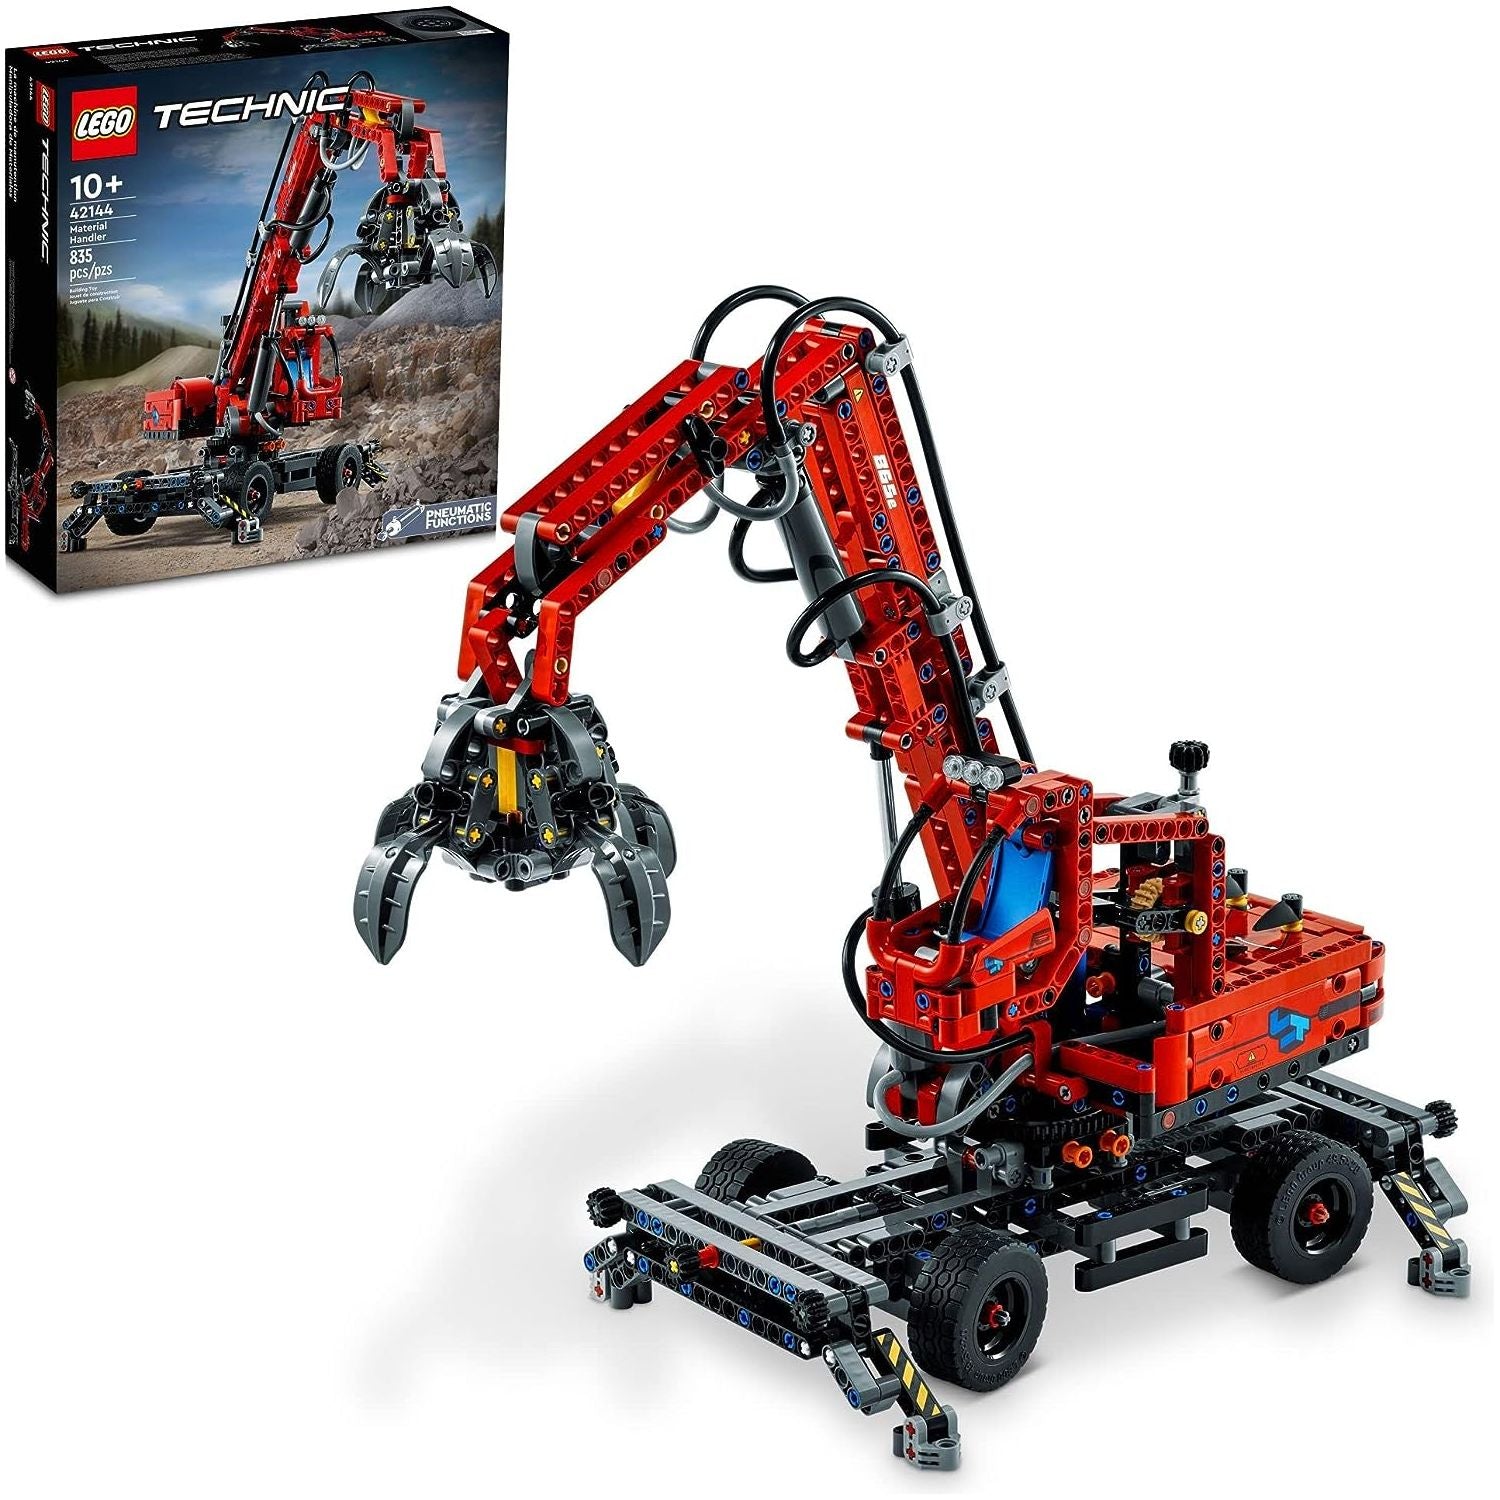 LEGO 42144 Technic Material Handler Crane Building Toy Set for Kids, Boys, and Girls Ages 10+ (835 Pieces)